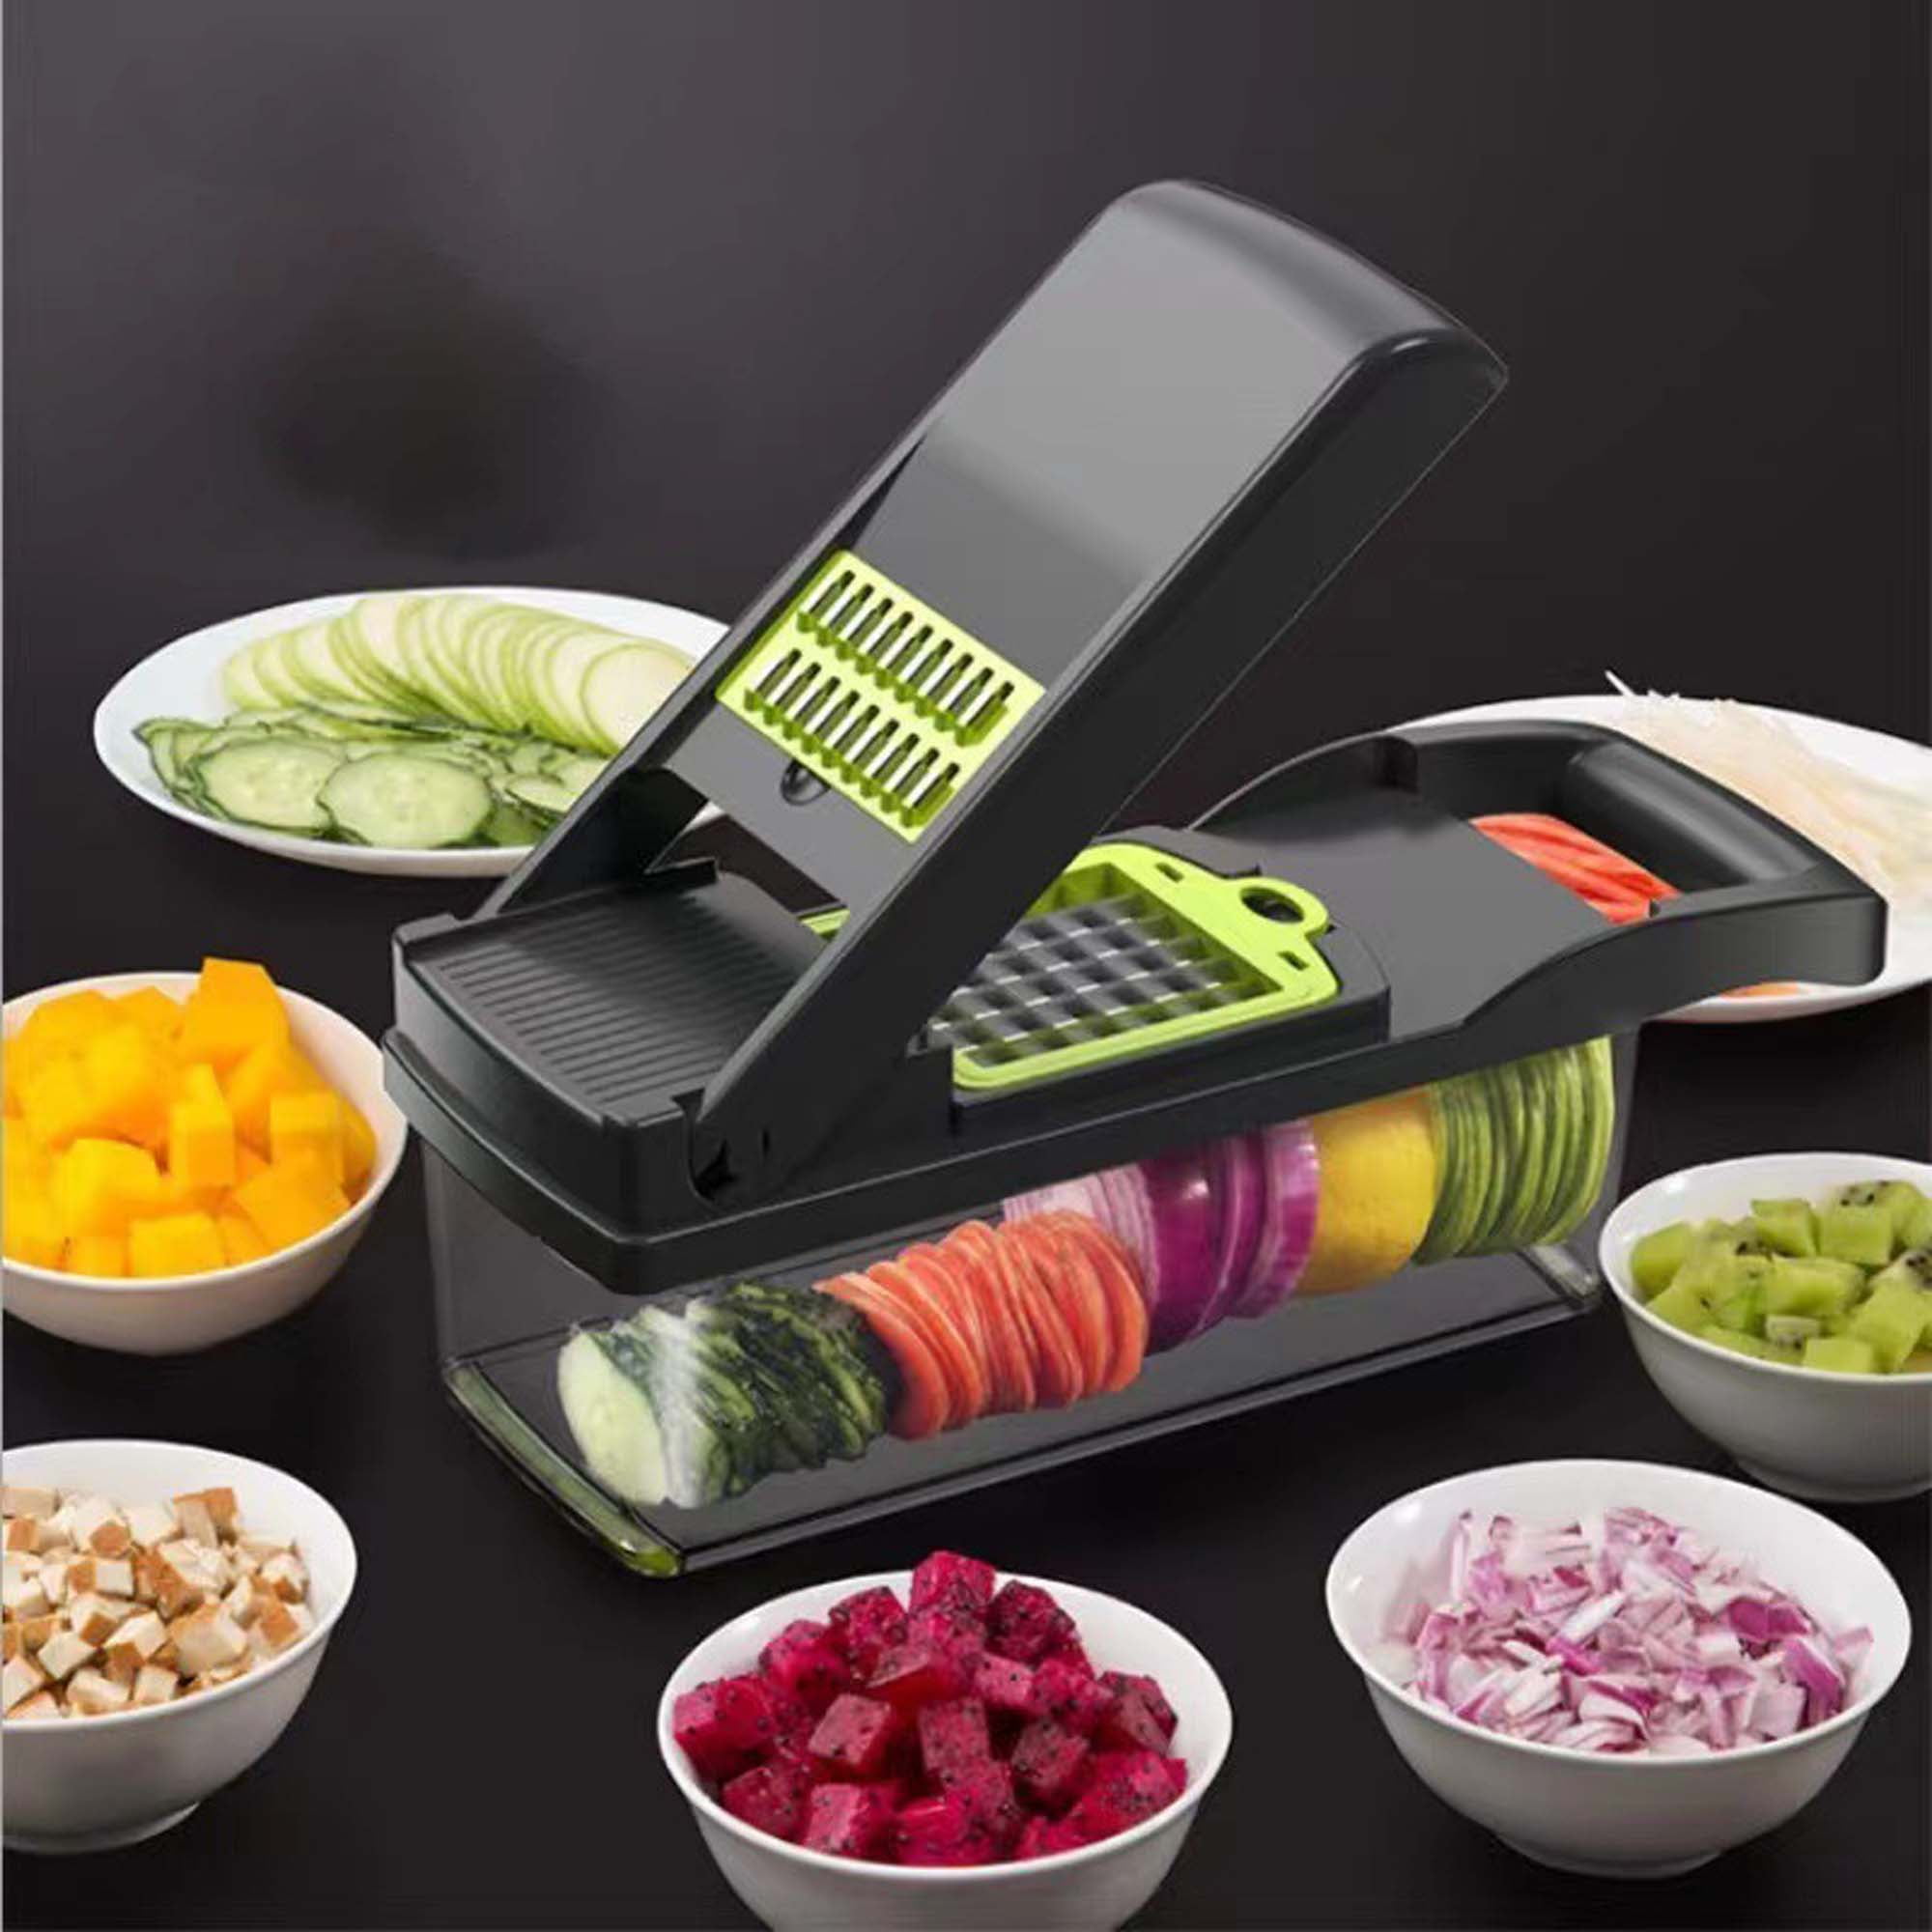 WeiloveYa Vegetable Chopper, Pro Onion Chopper, Multifunctional 13 in 1 Food  Chopper, Kitchen Vegetable Slicer Dicer Cutter,Veggie Chopper With 8  Blades,Carrot and Garlic Chopper With Container 